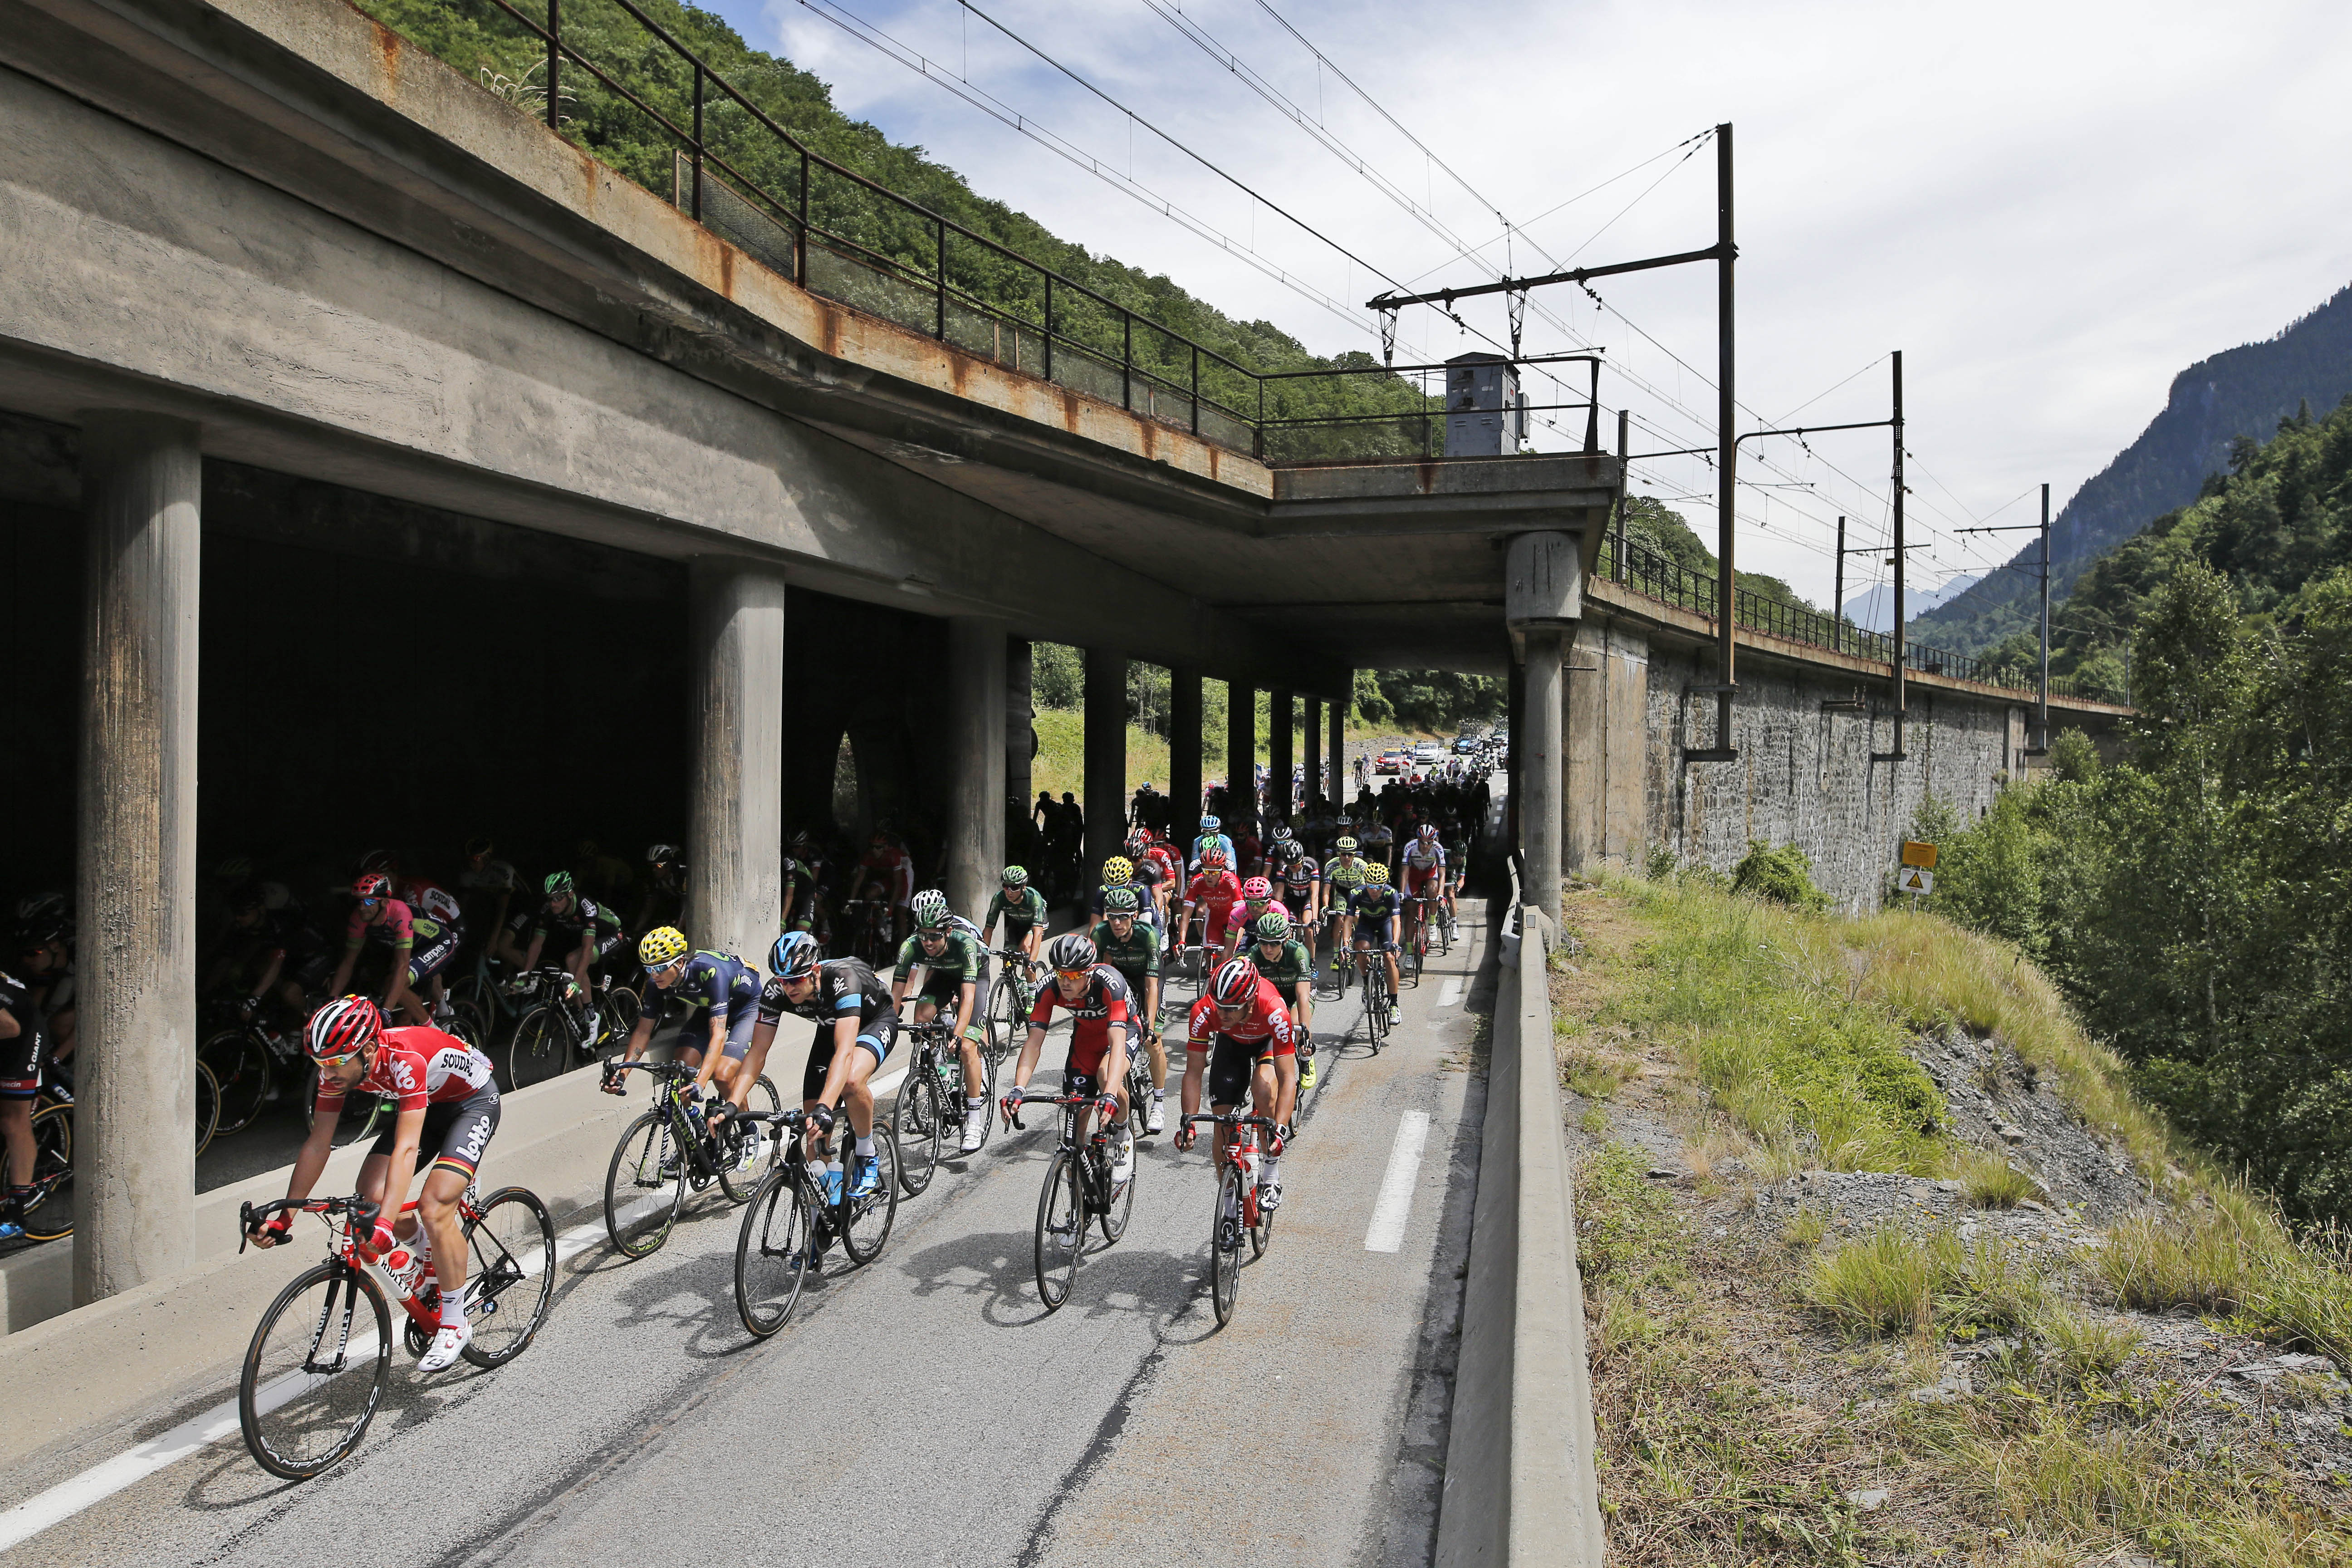 The pack passes under a railroad line during the twentieth stage of the Tour de France cycling race over 110.5 kilometers (68.7 miles) with start in Modane and finish in Alpe d'Huez, France, Saturday, July 25, 2015. Photo: AP 